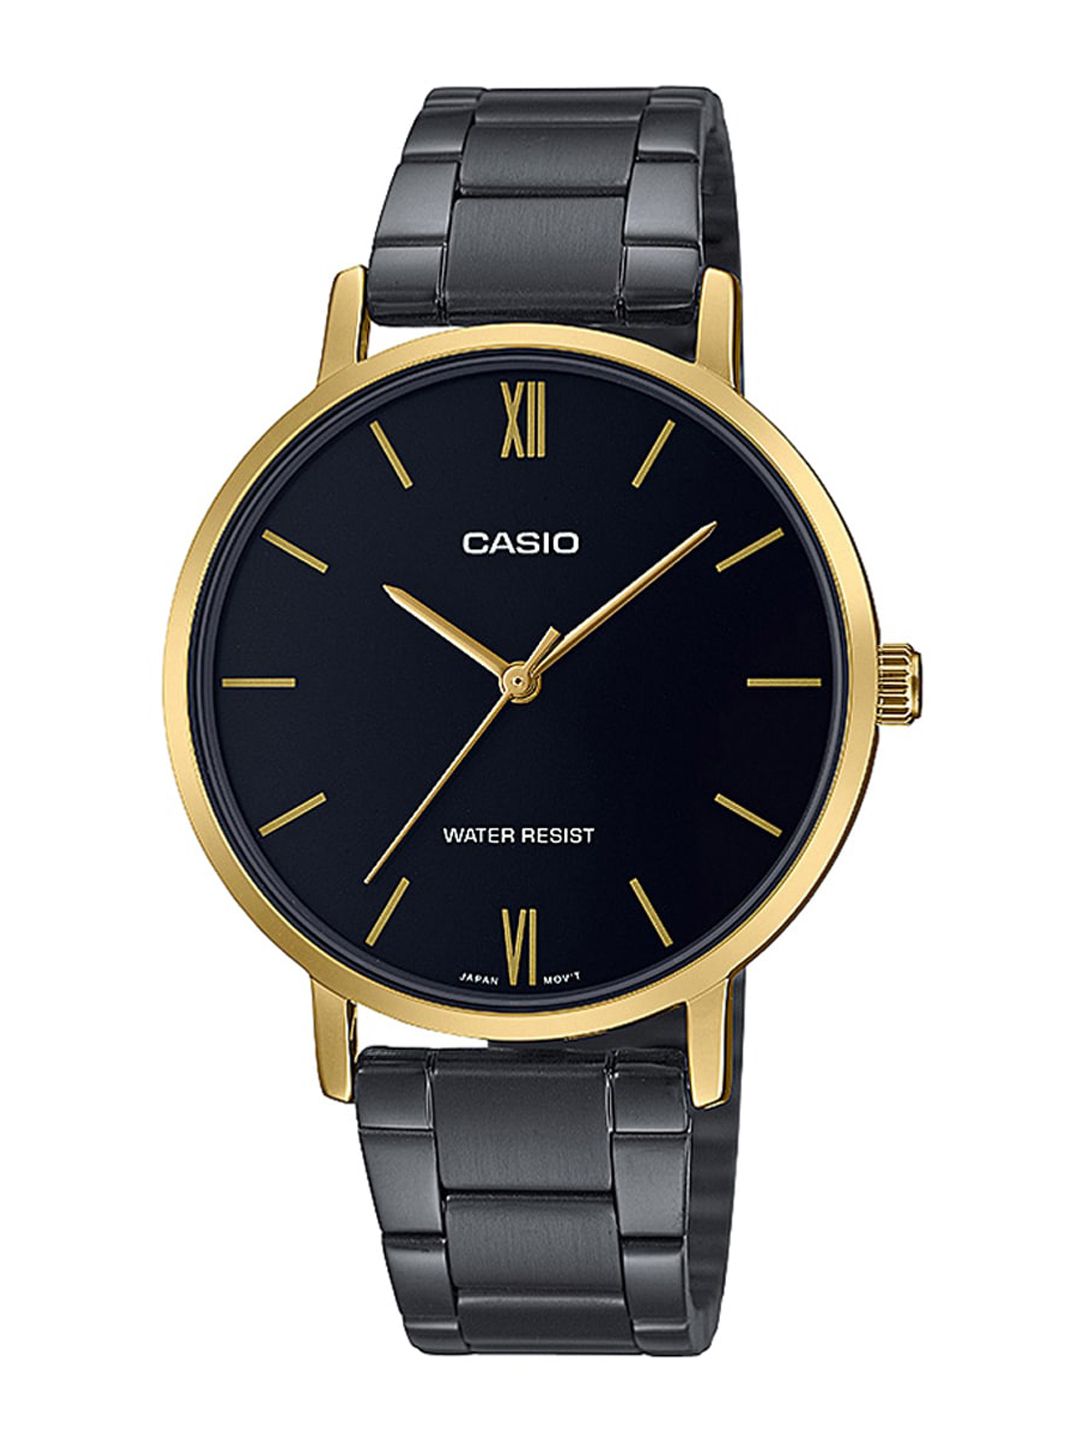 CASIO Women Black Dial & Black Stainless Steel Cuff Straps Analogue Watch Price in India